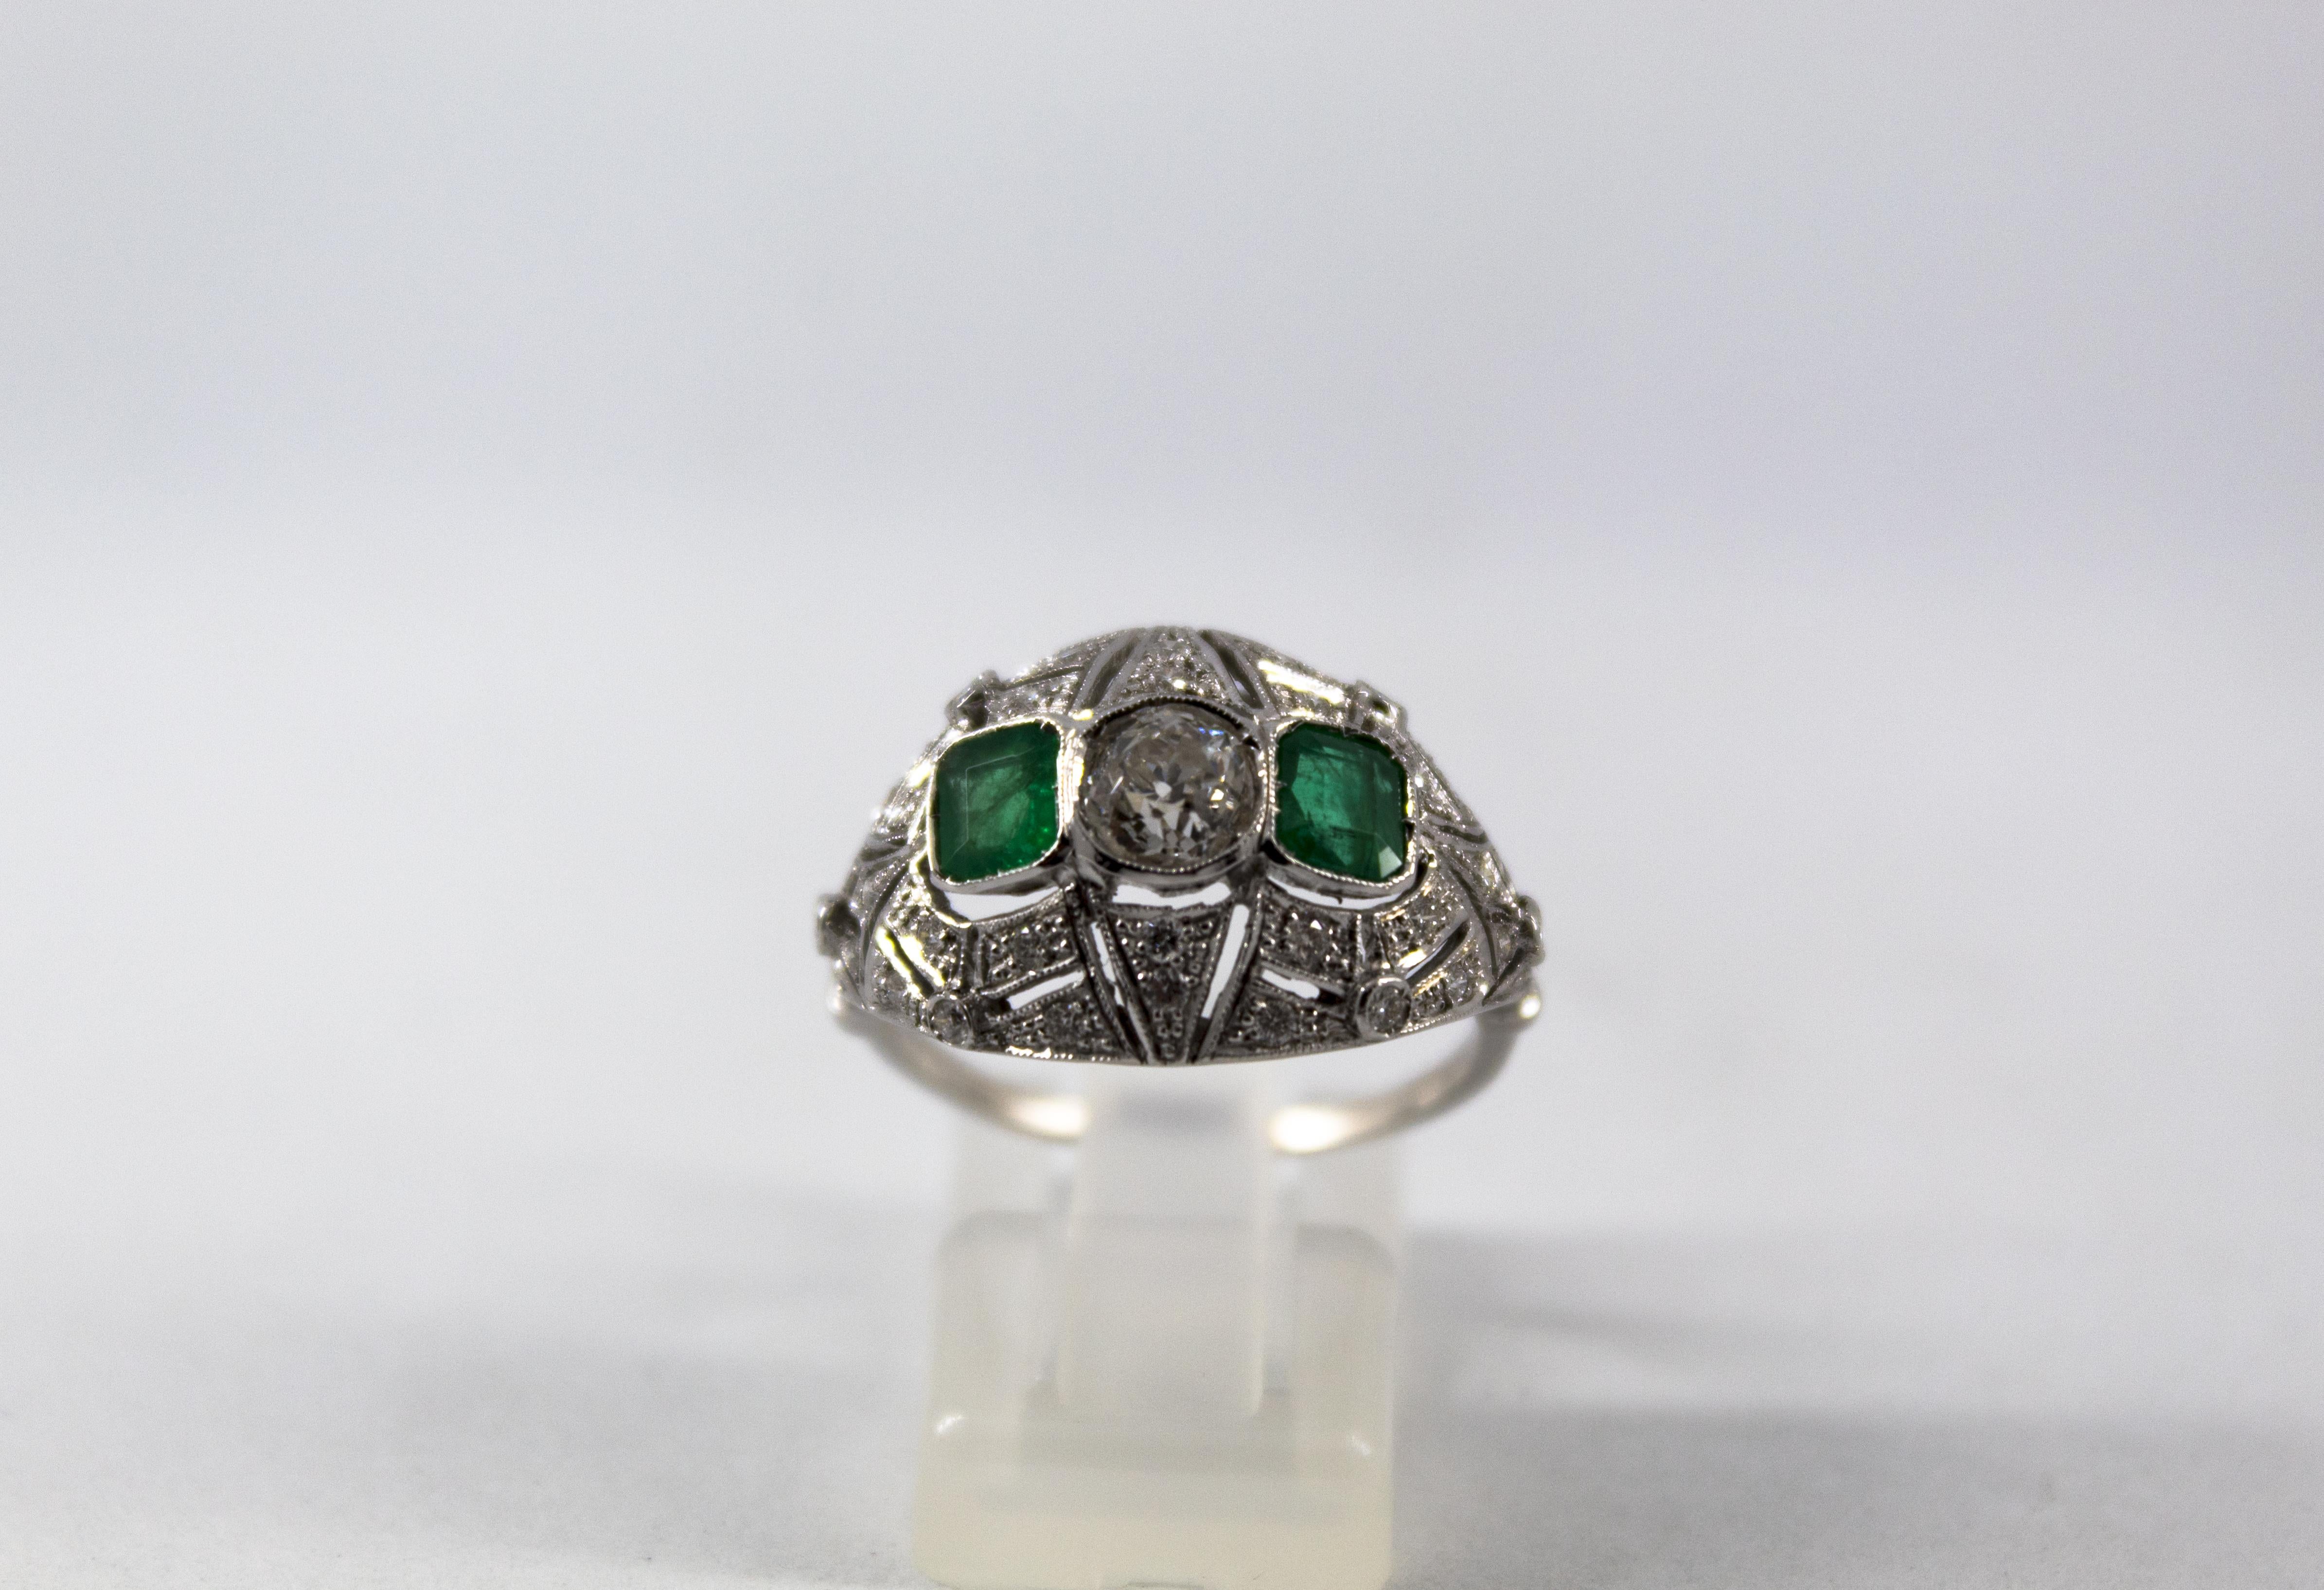 This Ring is made of 18K White Gold.
This Ring has 1.00 Carats of White Modern Round Cut Diamonds.
This Ring has 0.60 Carats of Emeralds.
This Ring is inspired by Art Deco.
This Ring is available also with Blue Sapphires or Rubies.
Size ITA: 17 USA: